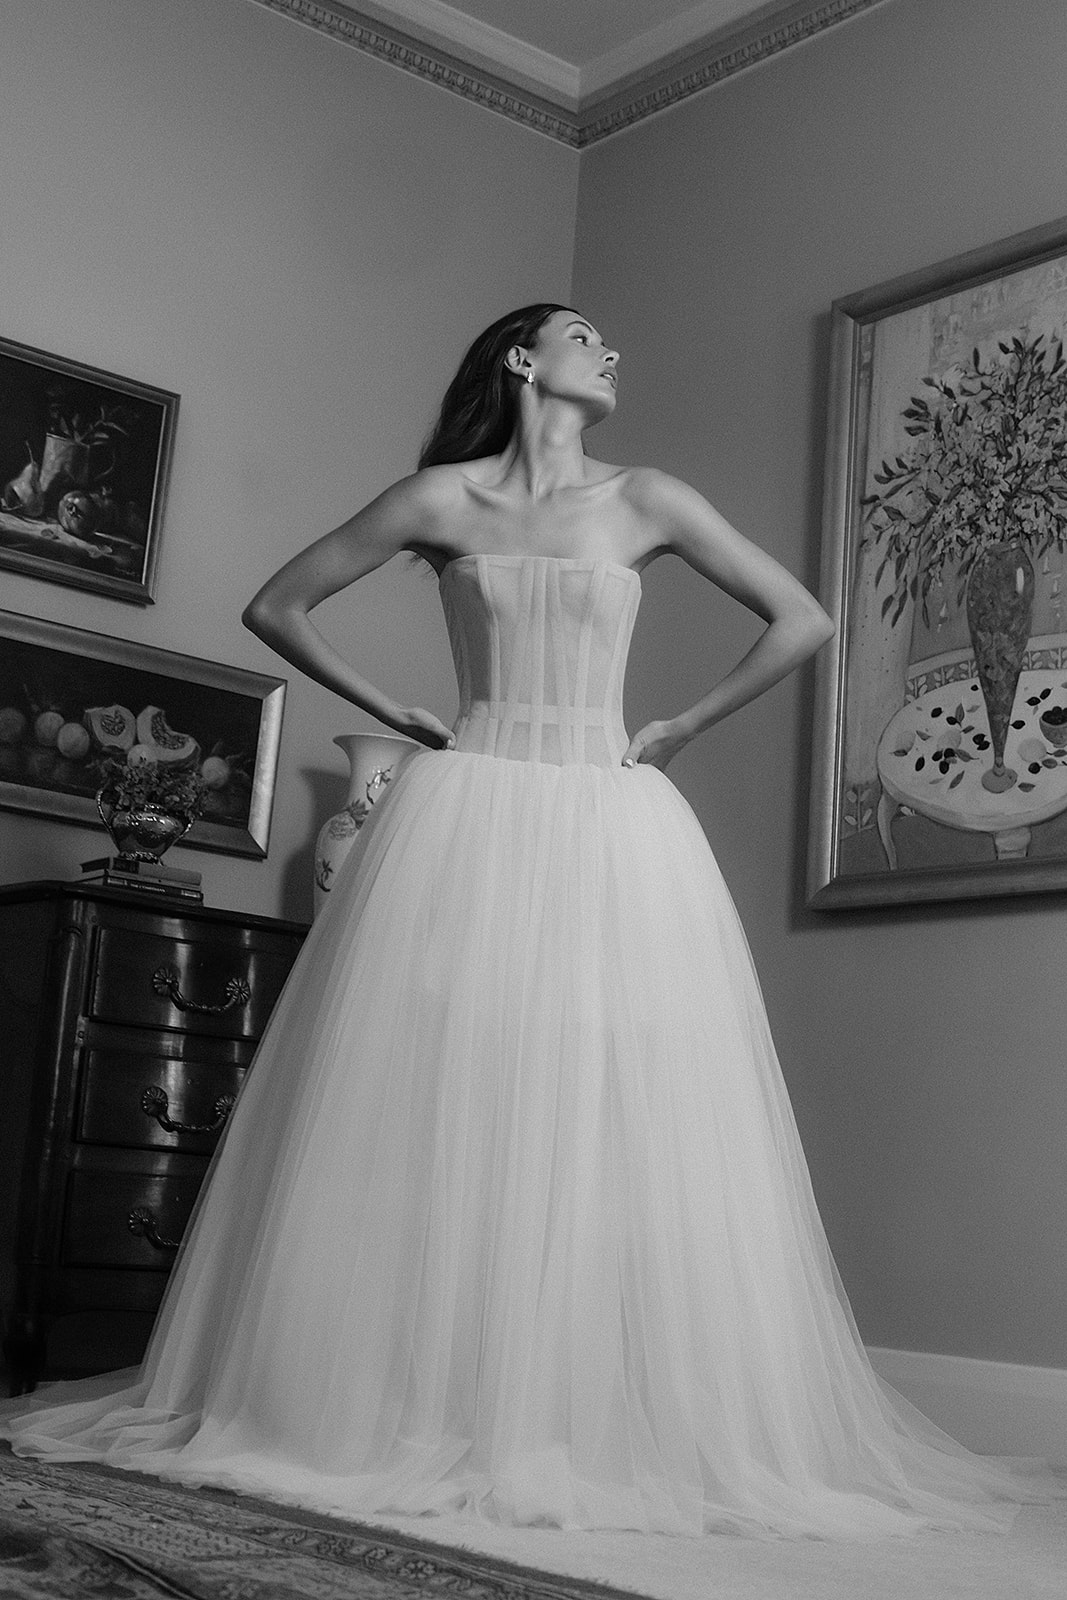 Ball gown with sheer corset detailing and drop-waist